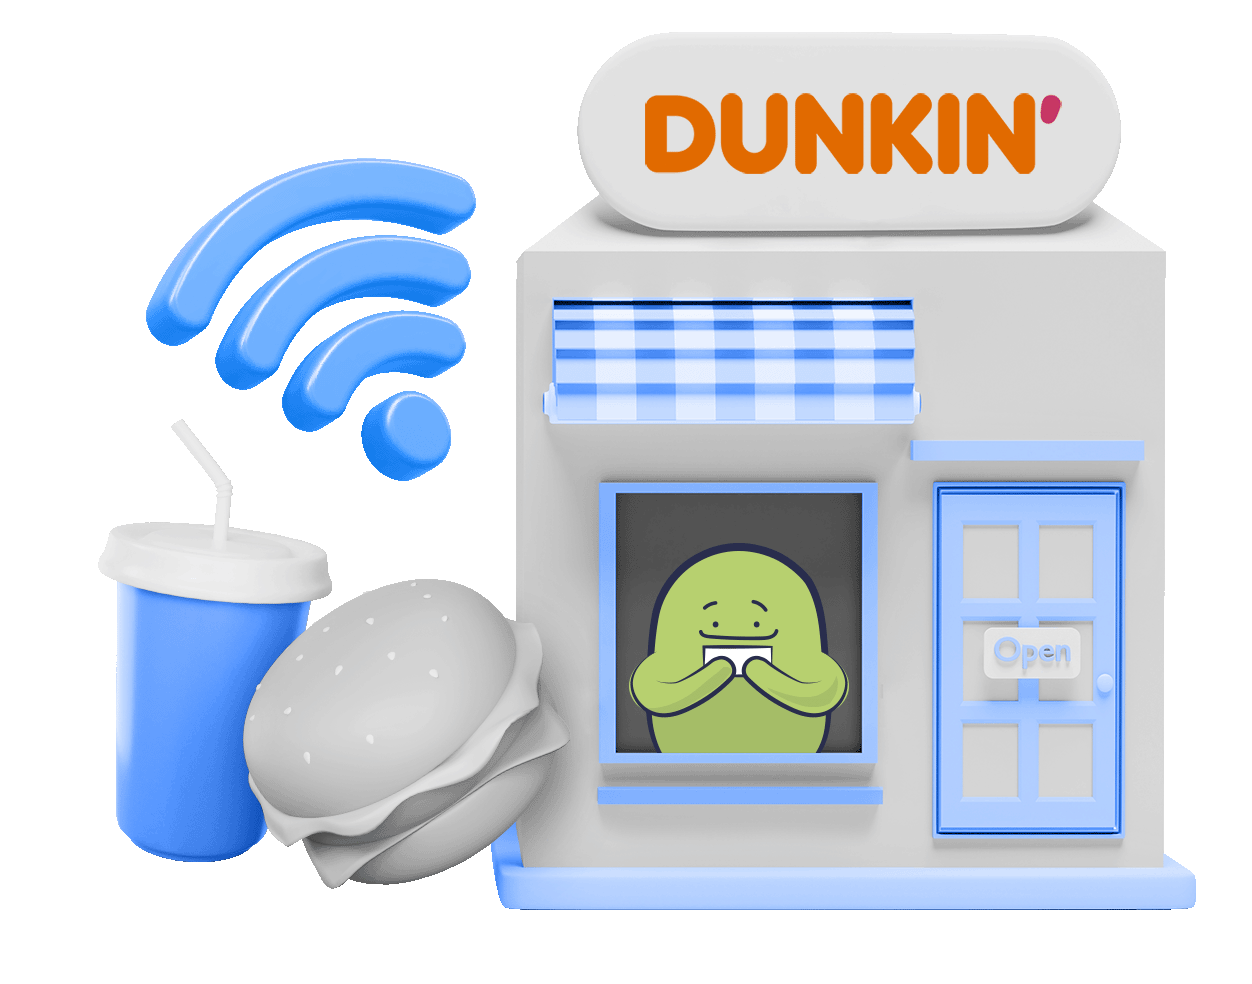 How to connect to Dunkin Donuts WiFi more safely